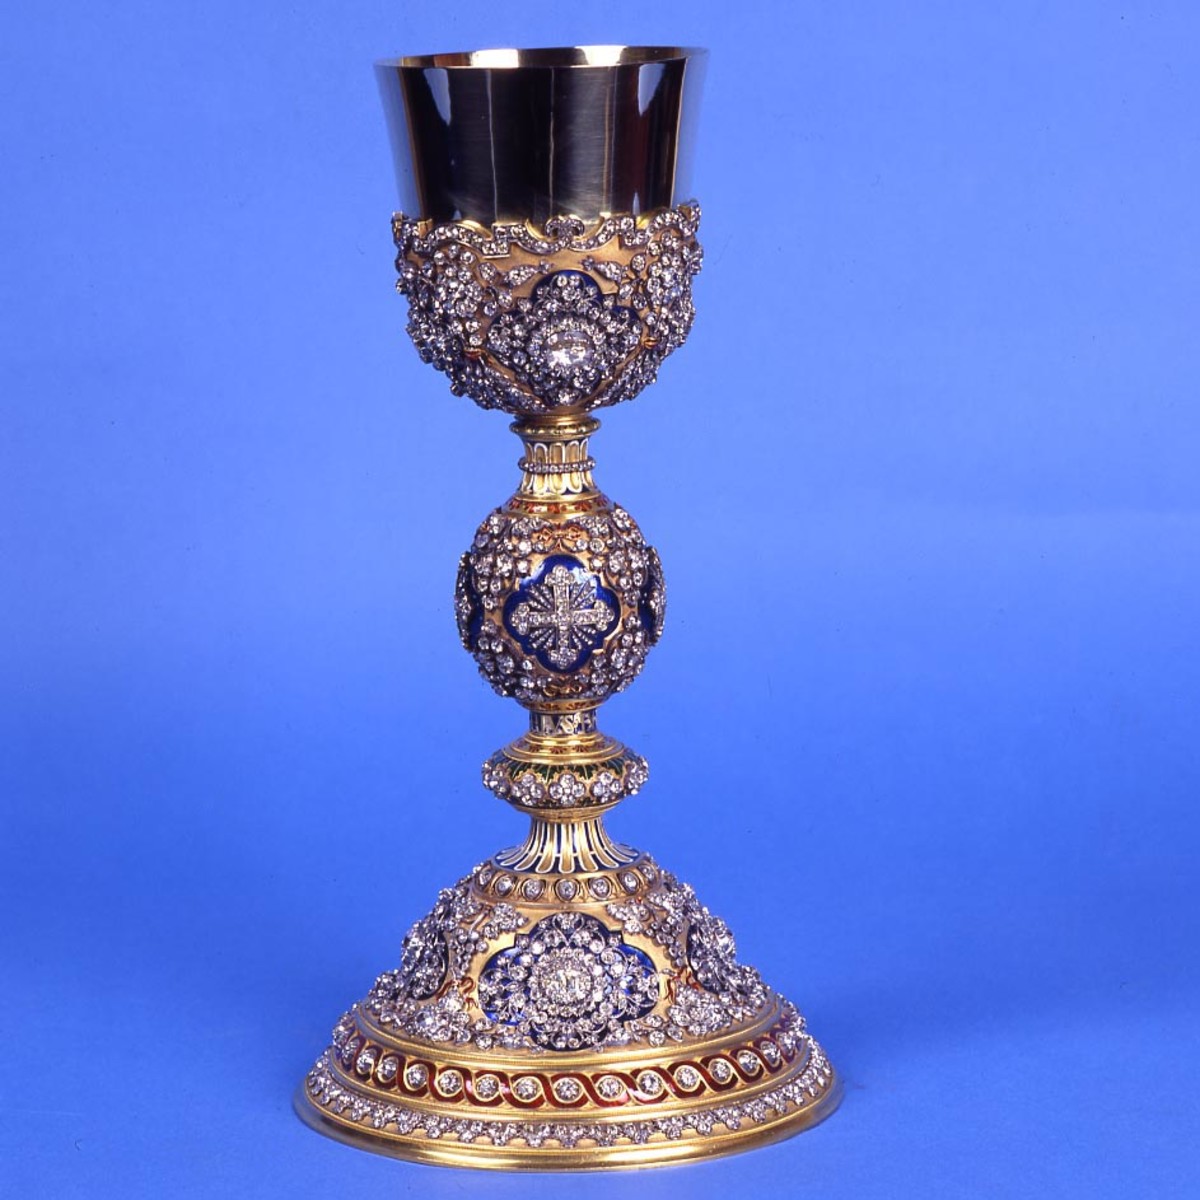 THE PAPAL CHALICE